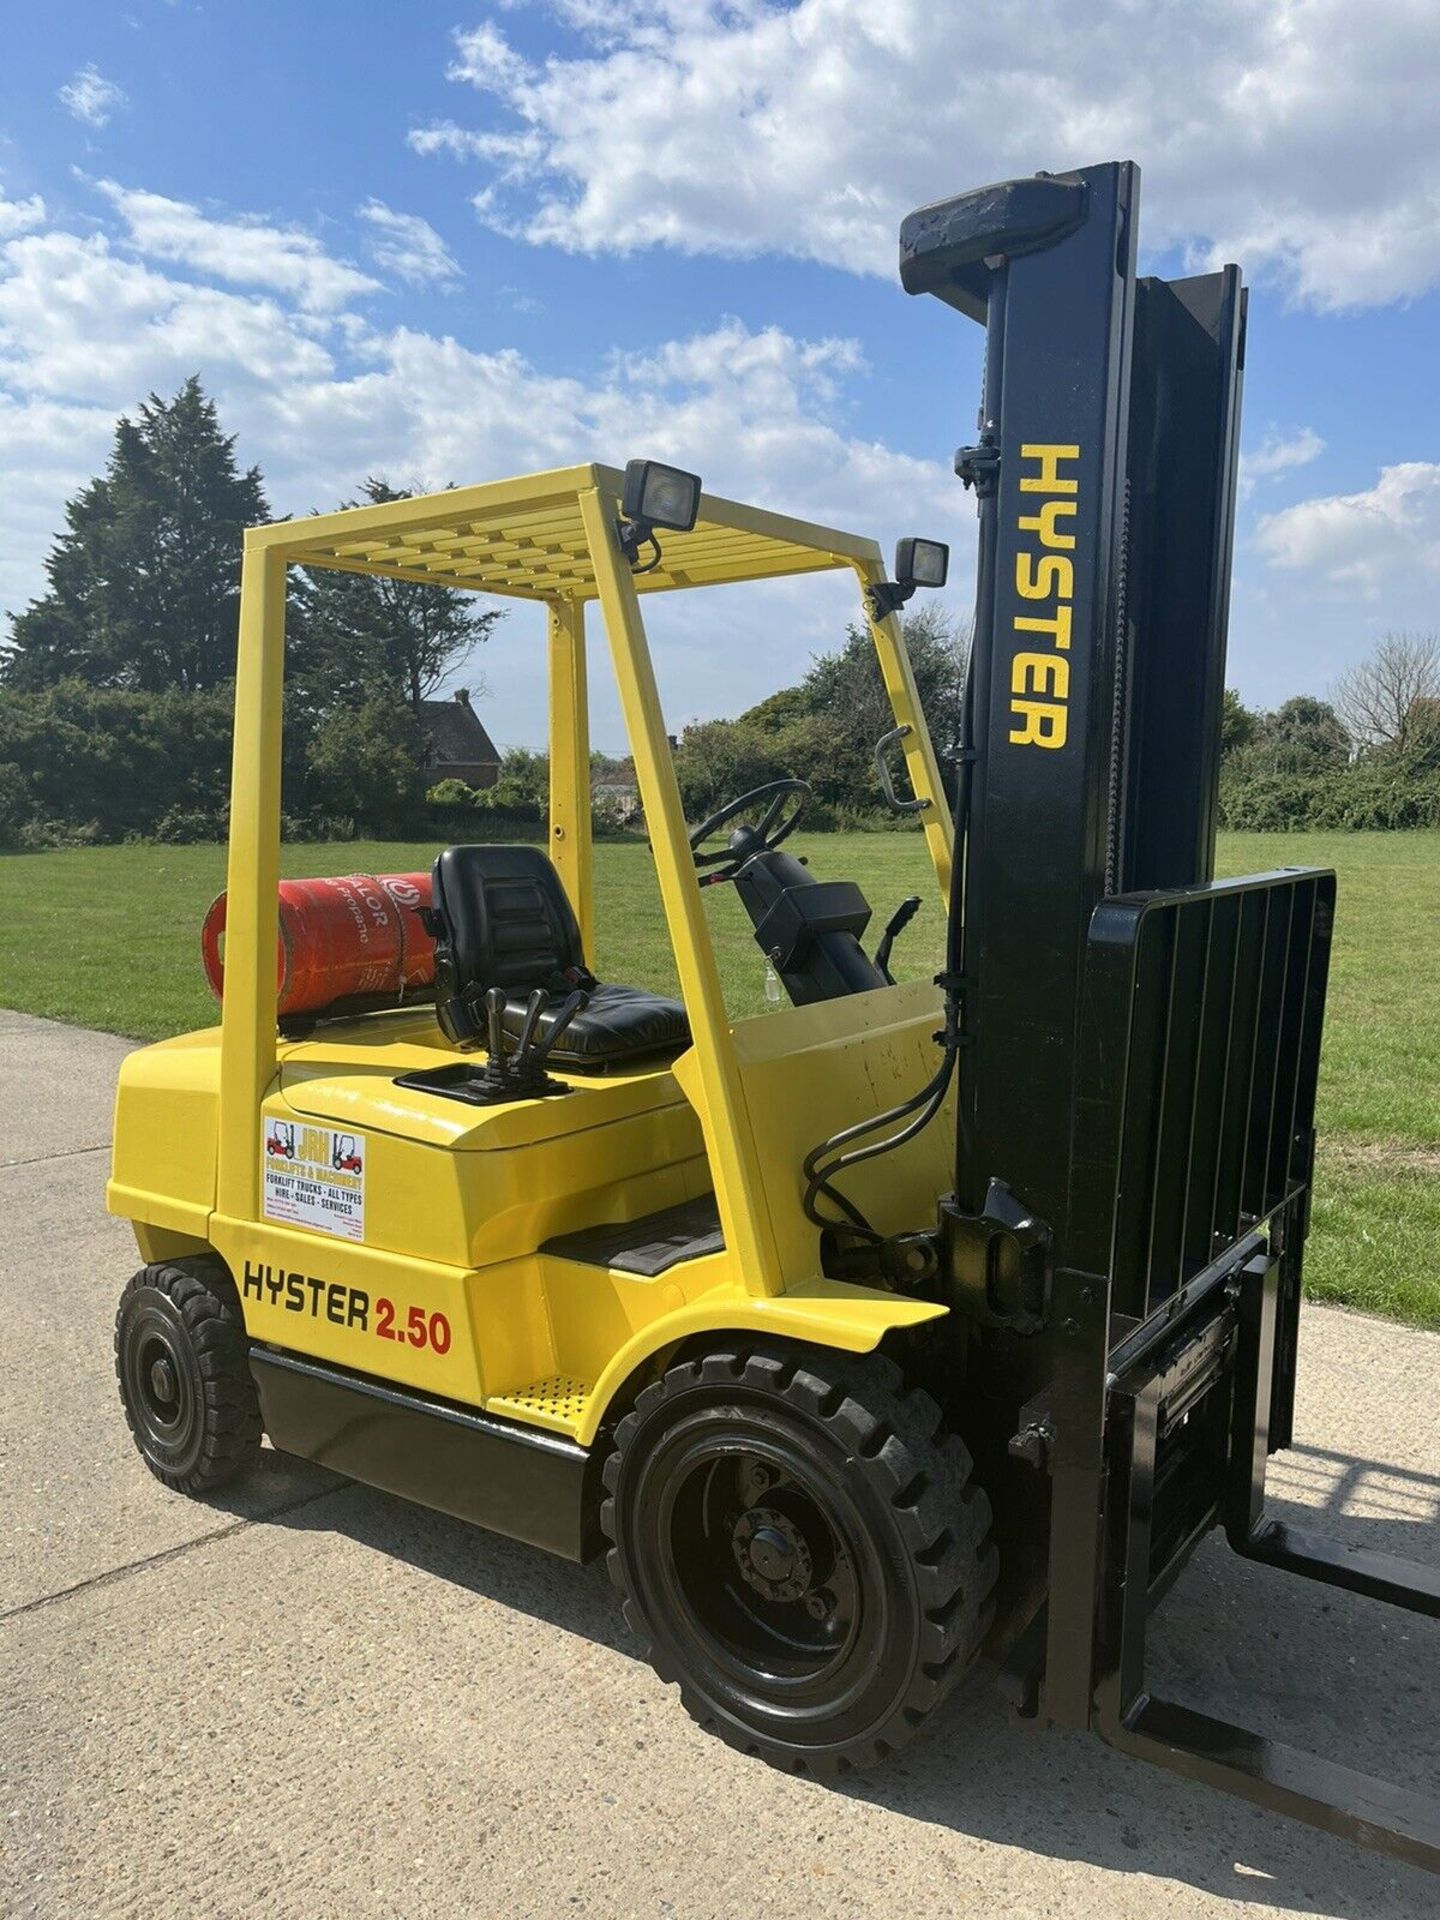 Hyster forklift truck - Image 3 of 5